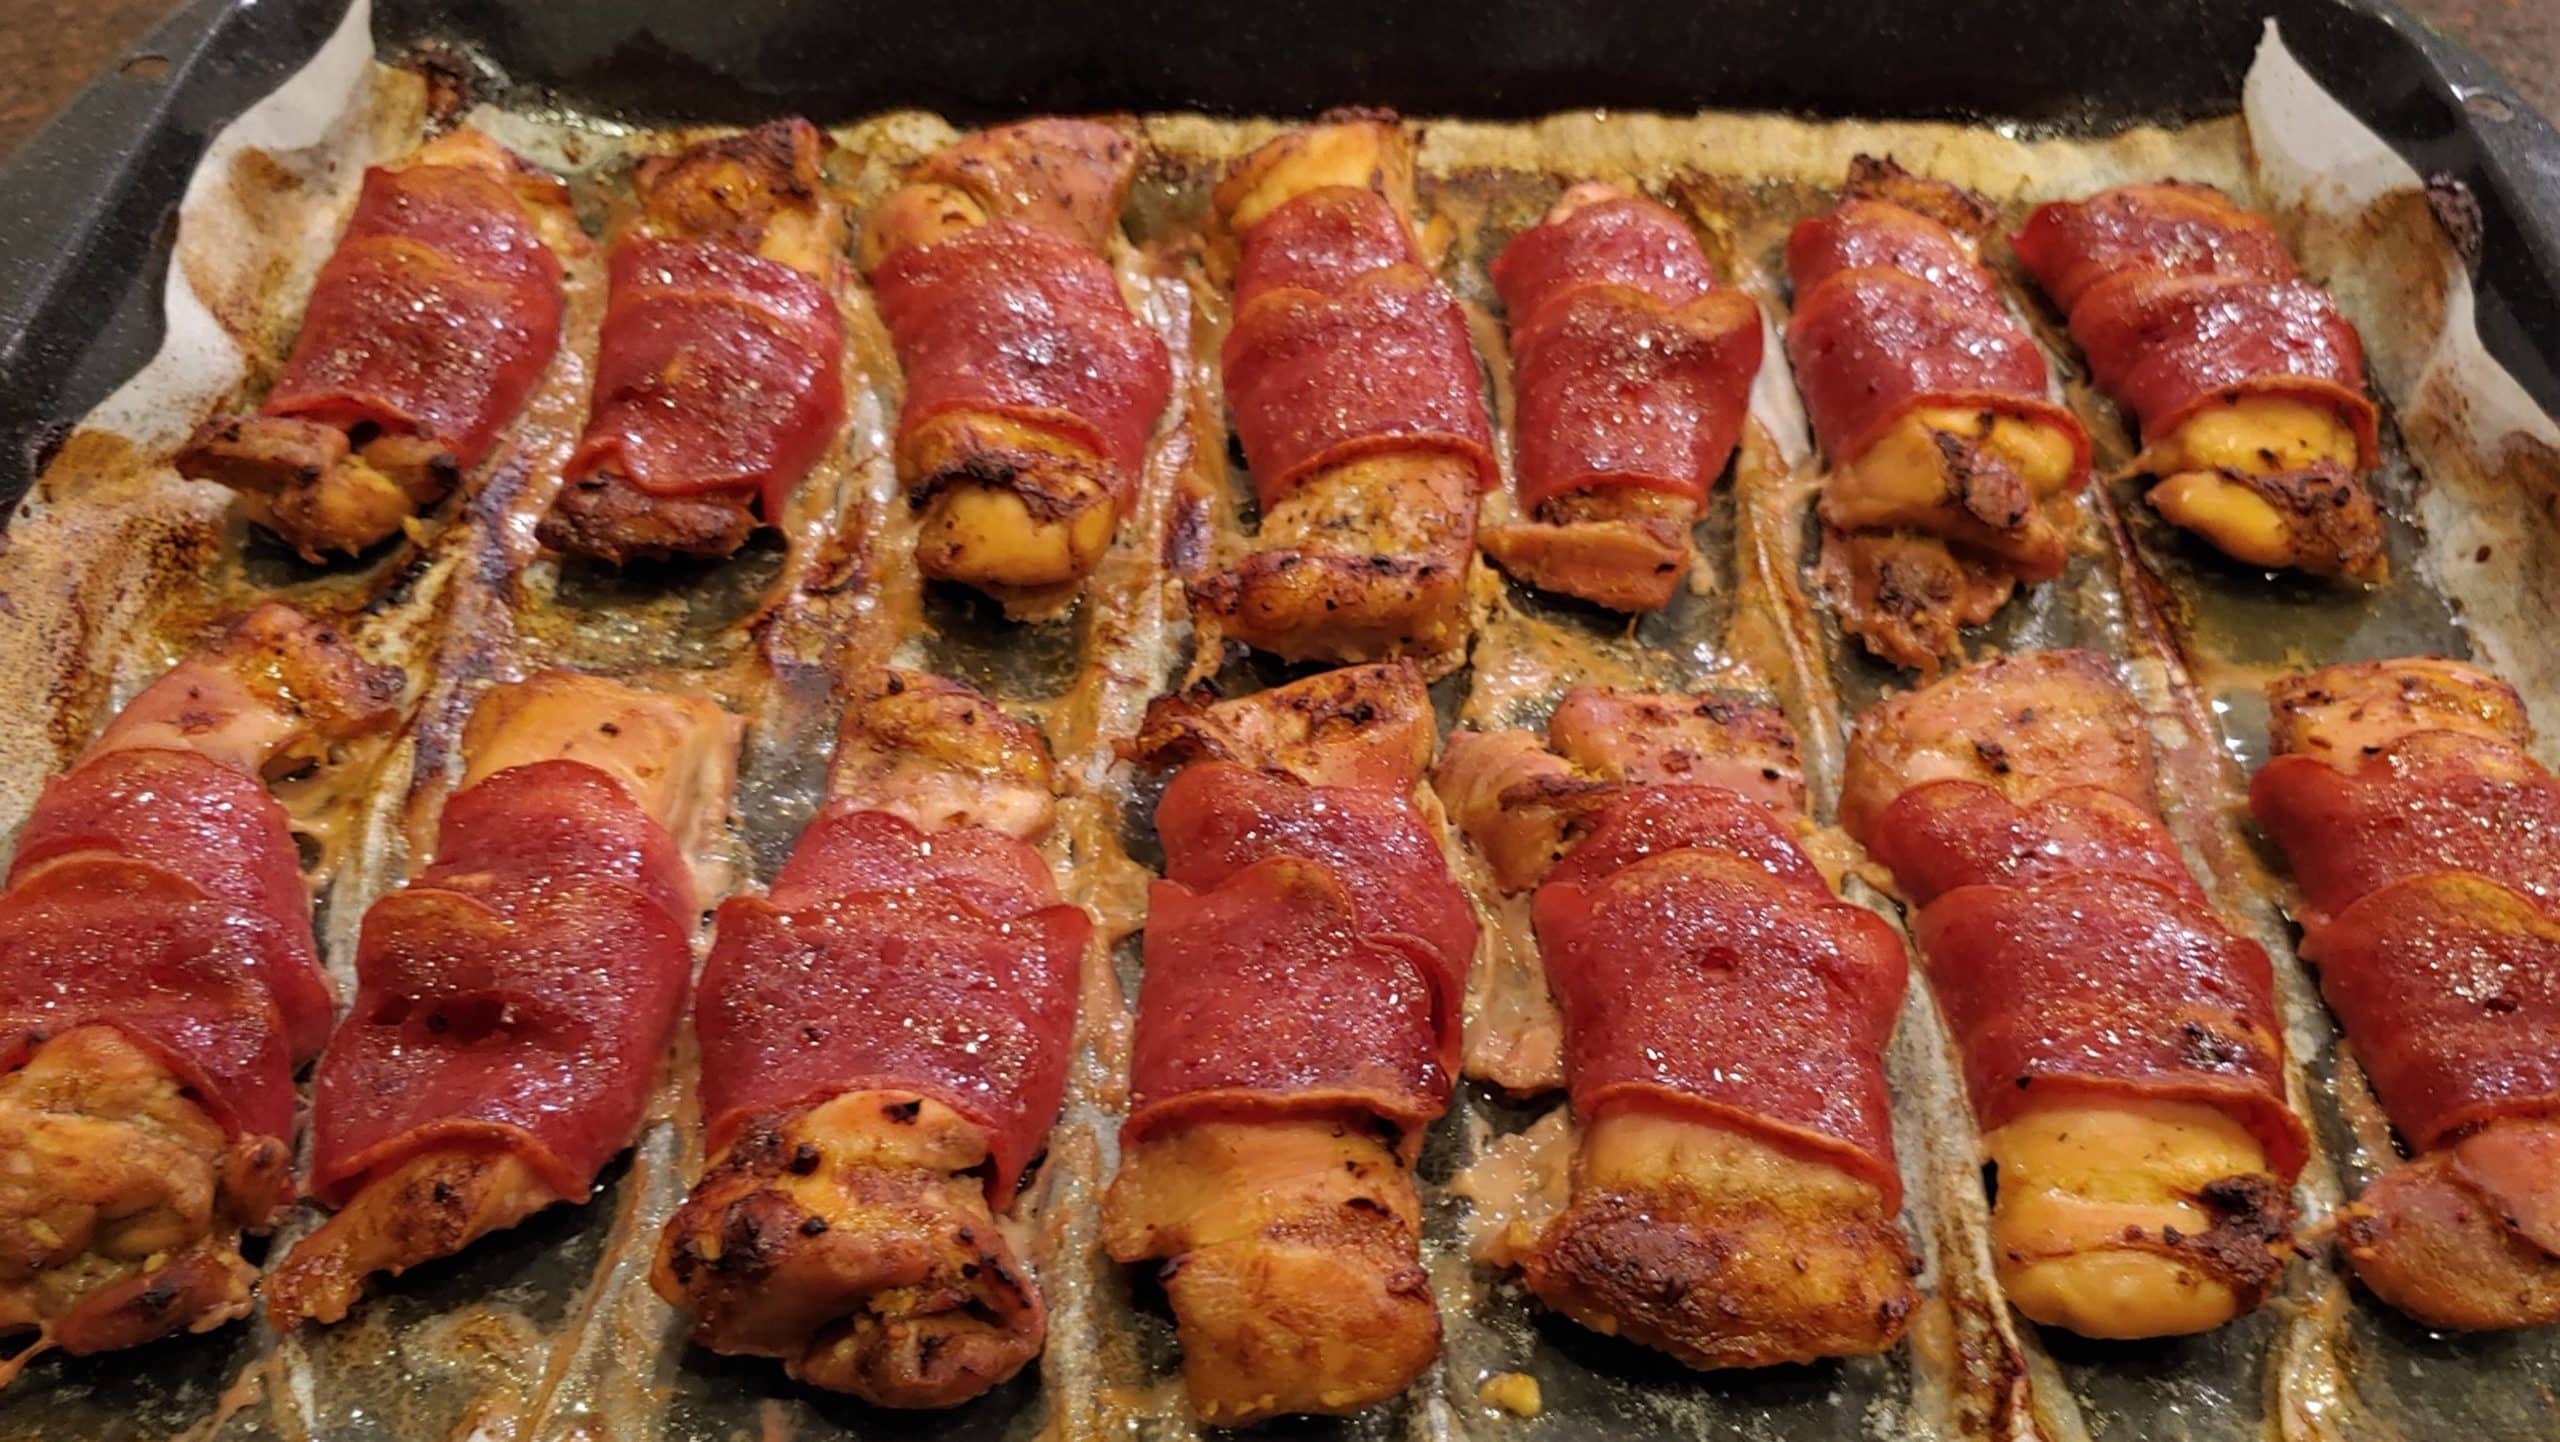 Boneless chicken bacon wrapped - Dining in with Danielle